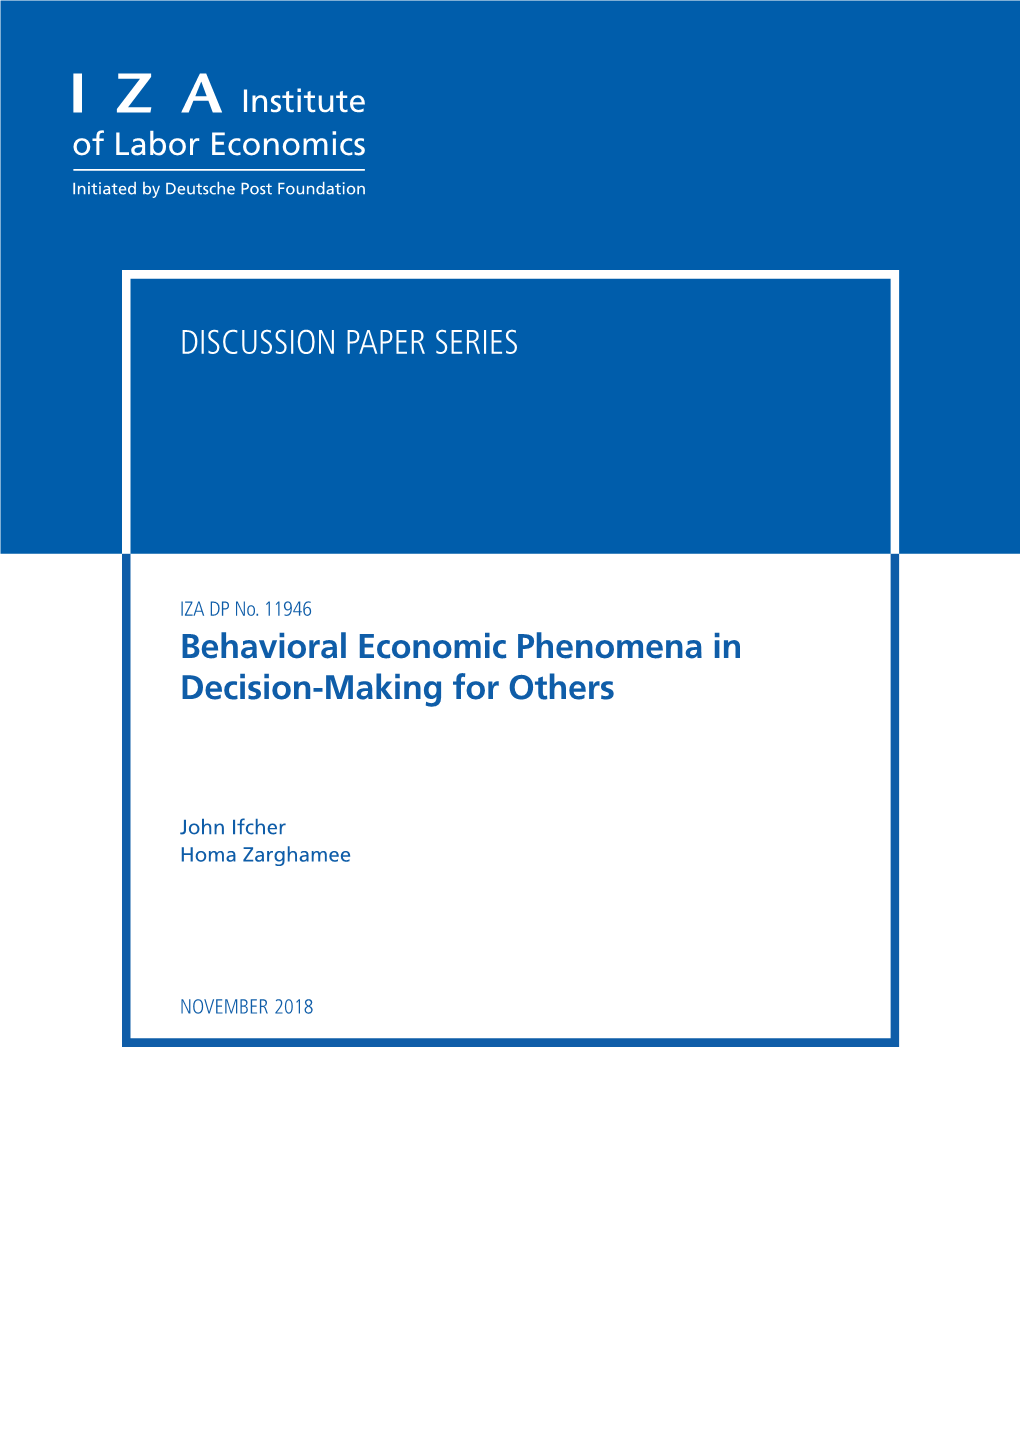 DISCUSSION PAPER SERIES Behavioral Economic Phenomena in Decision-Making for Others